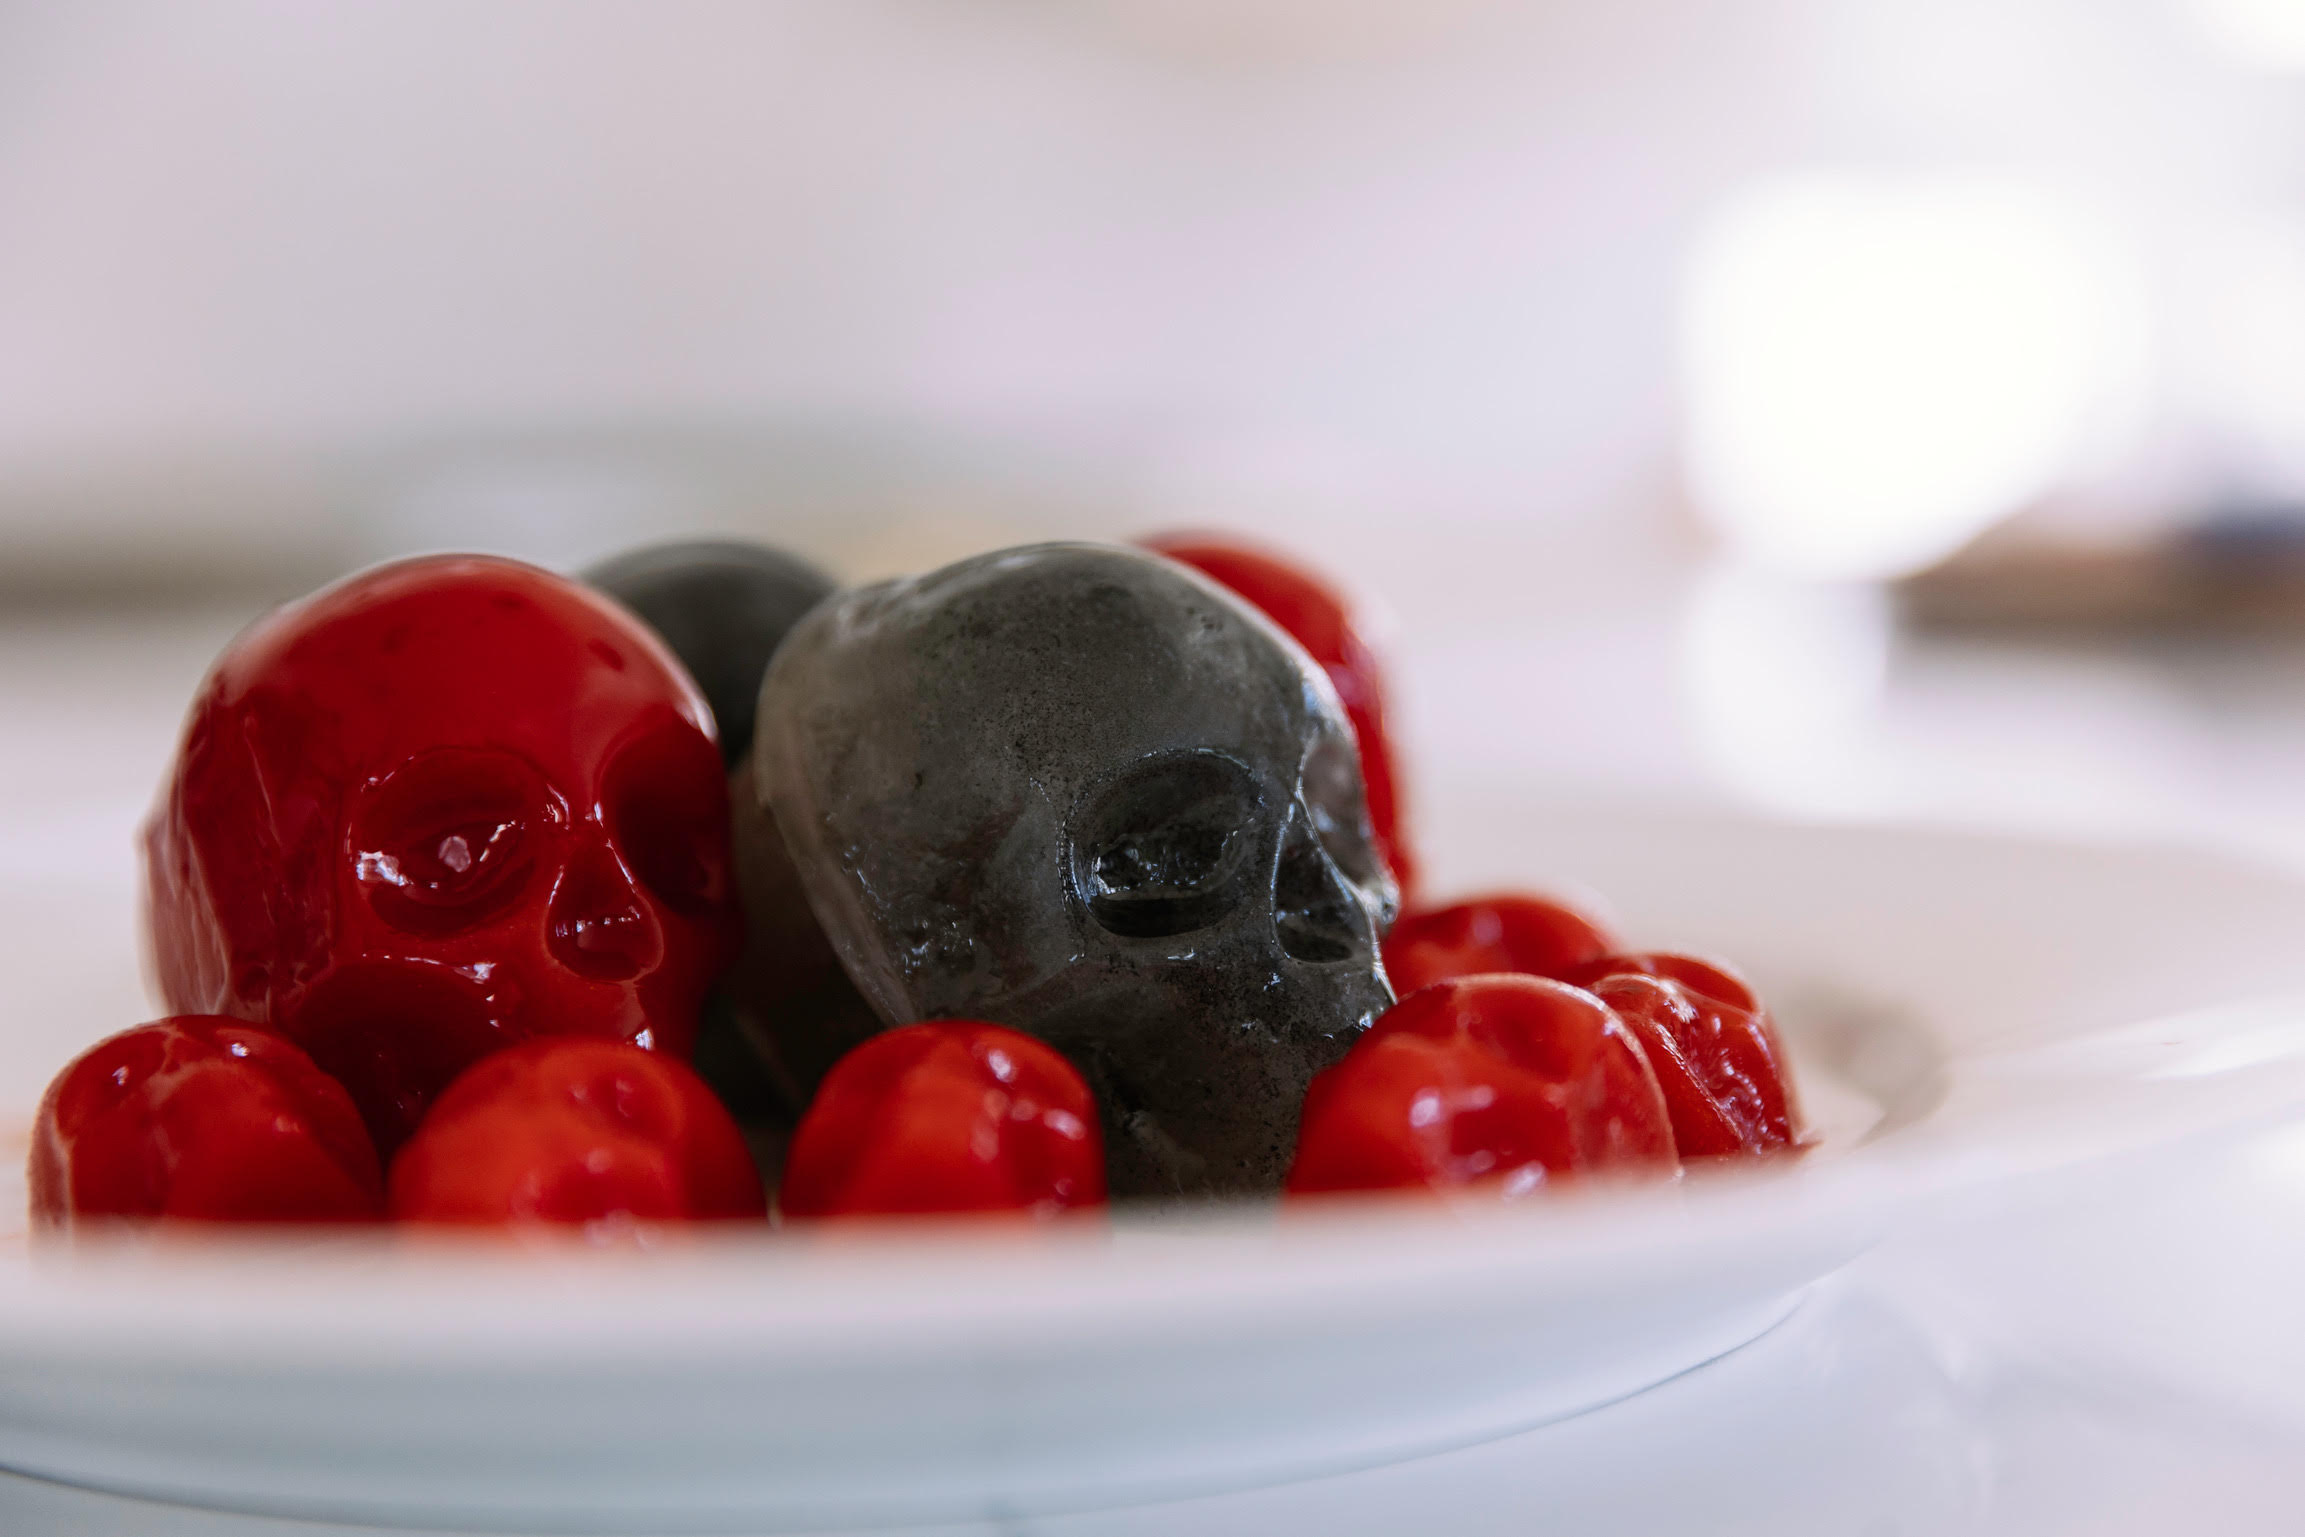 Skull candies on plate